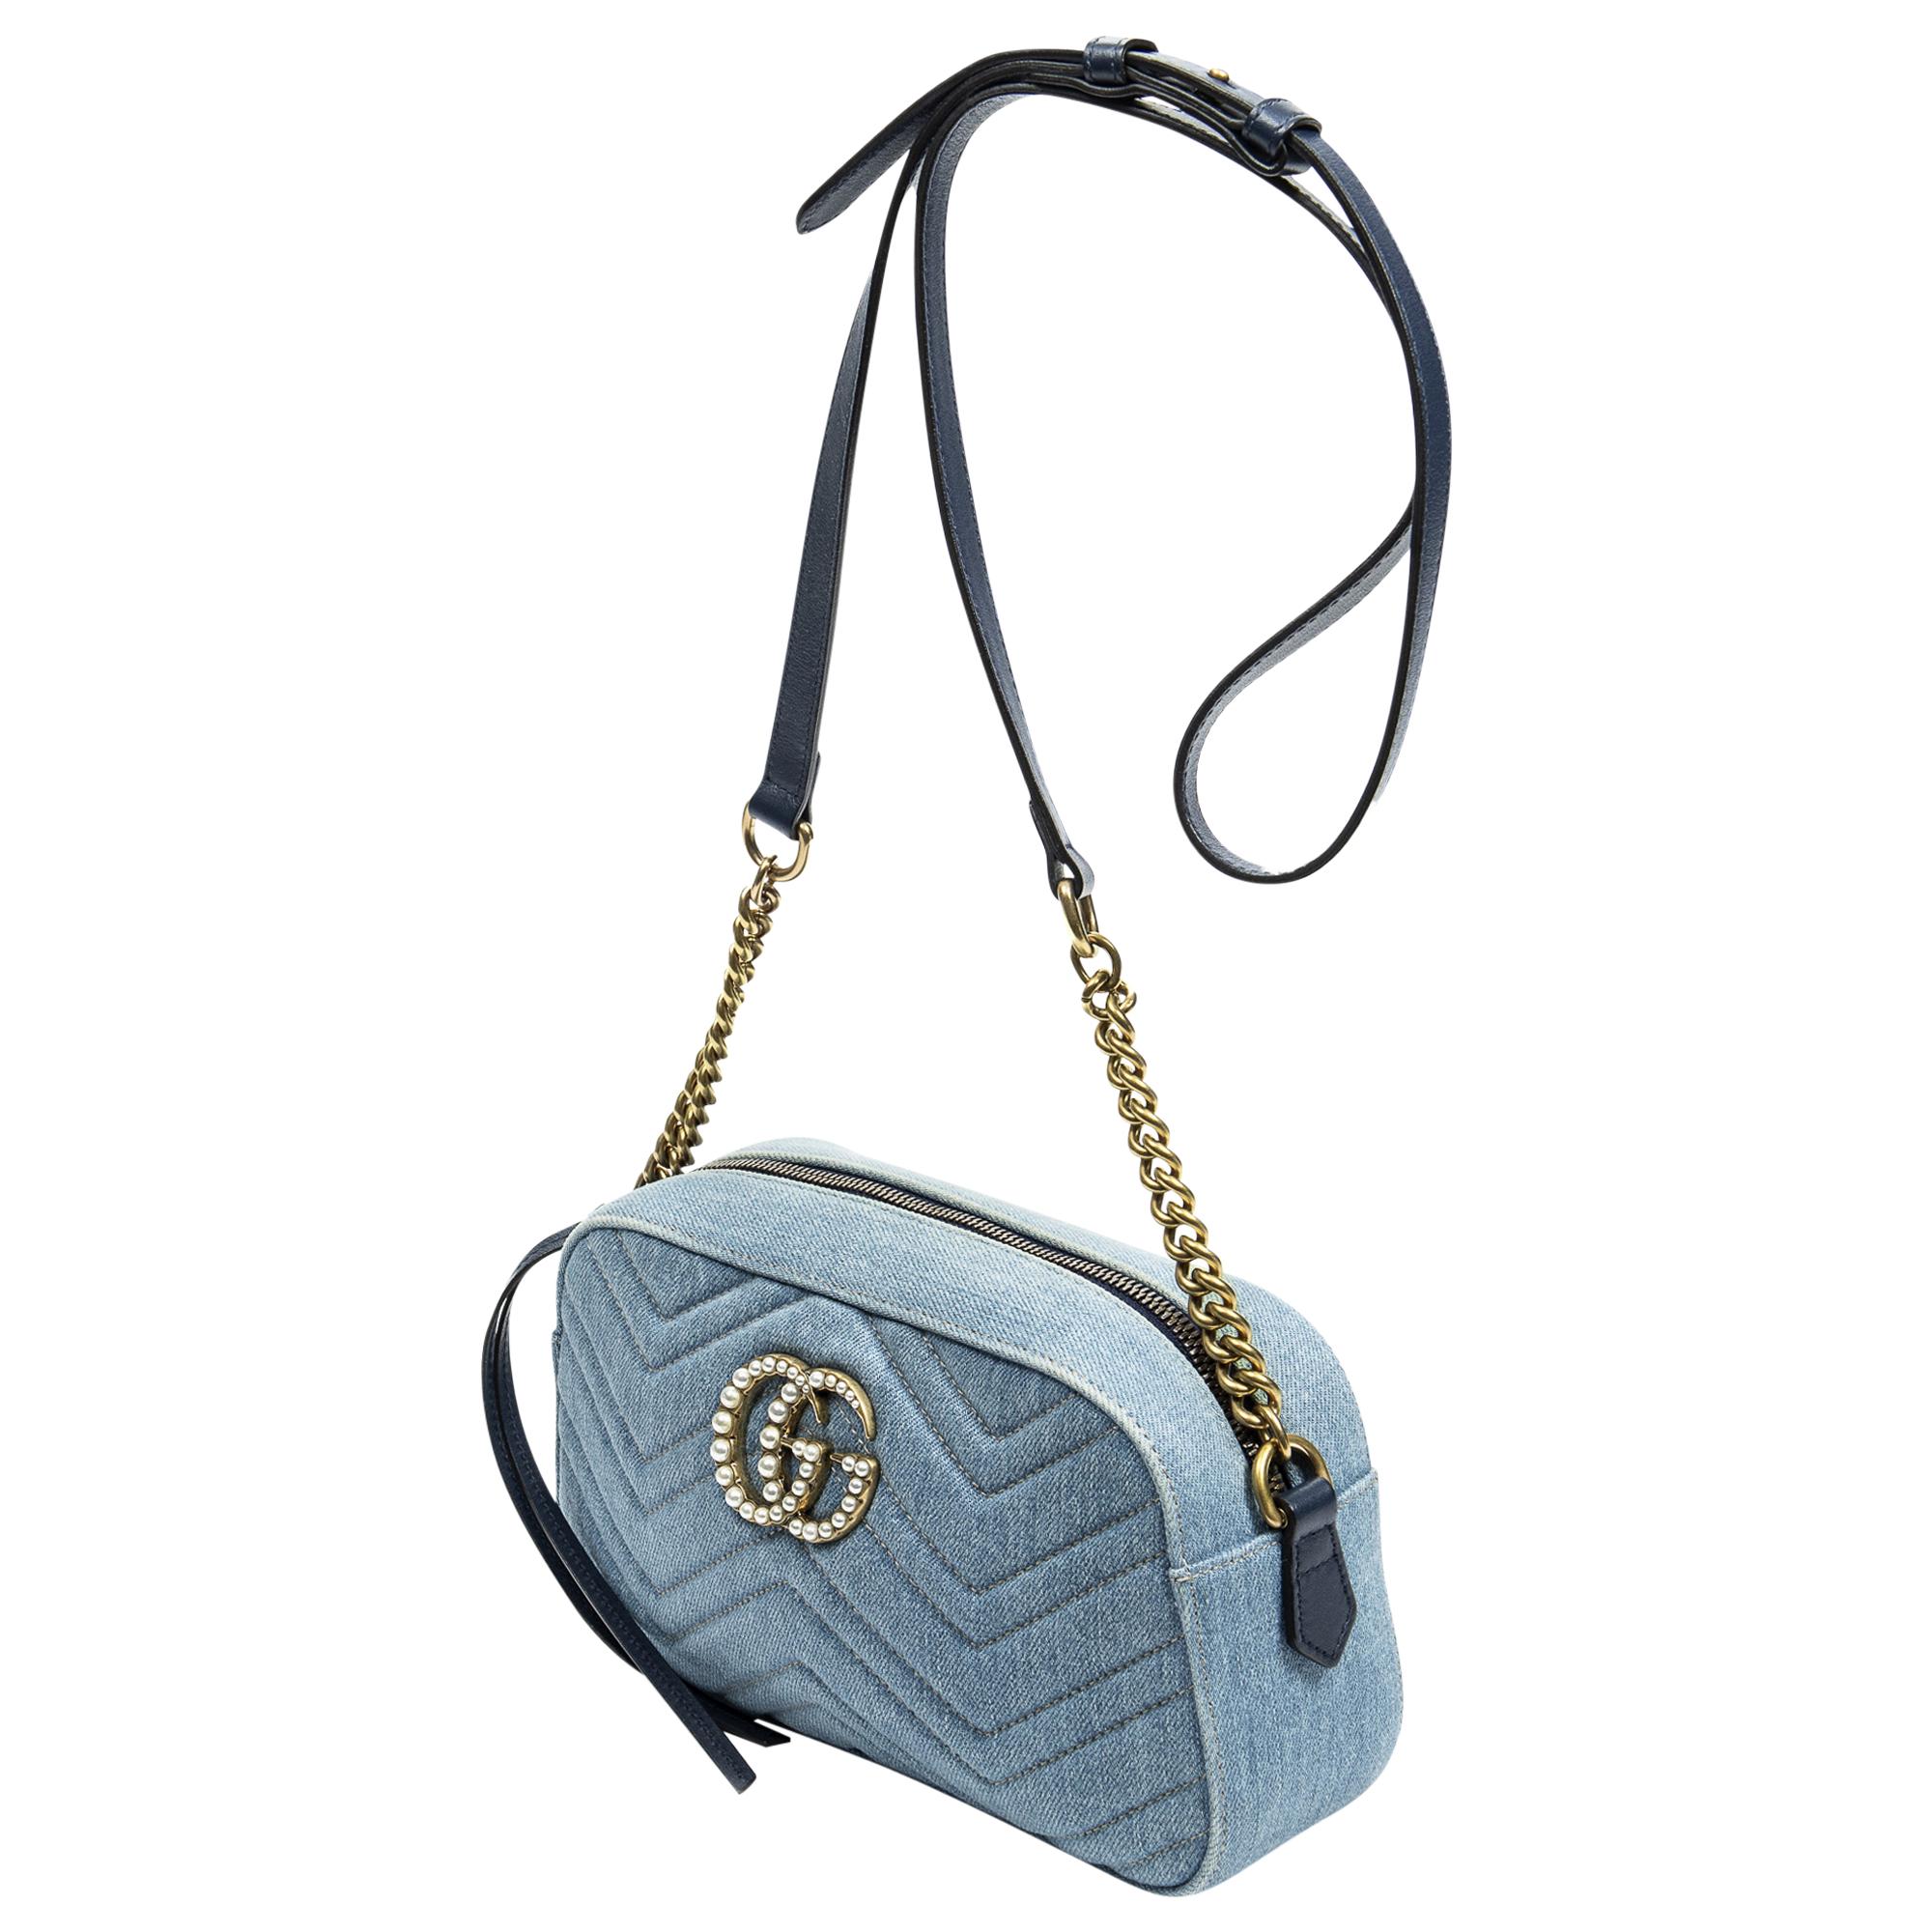 Elevate your casual chic with the Gucci Blue Denim Small GG Marmont Pearl Bag. Crafted from premium denim in a vibrant blue hue, it exudes effortless style. Accentuated with gleaming gold hardware and a convenient zipper closure, its satin-lined